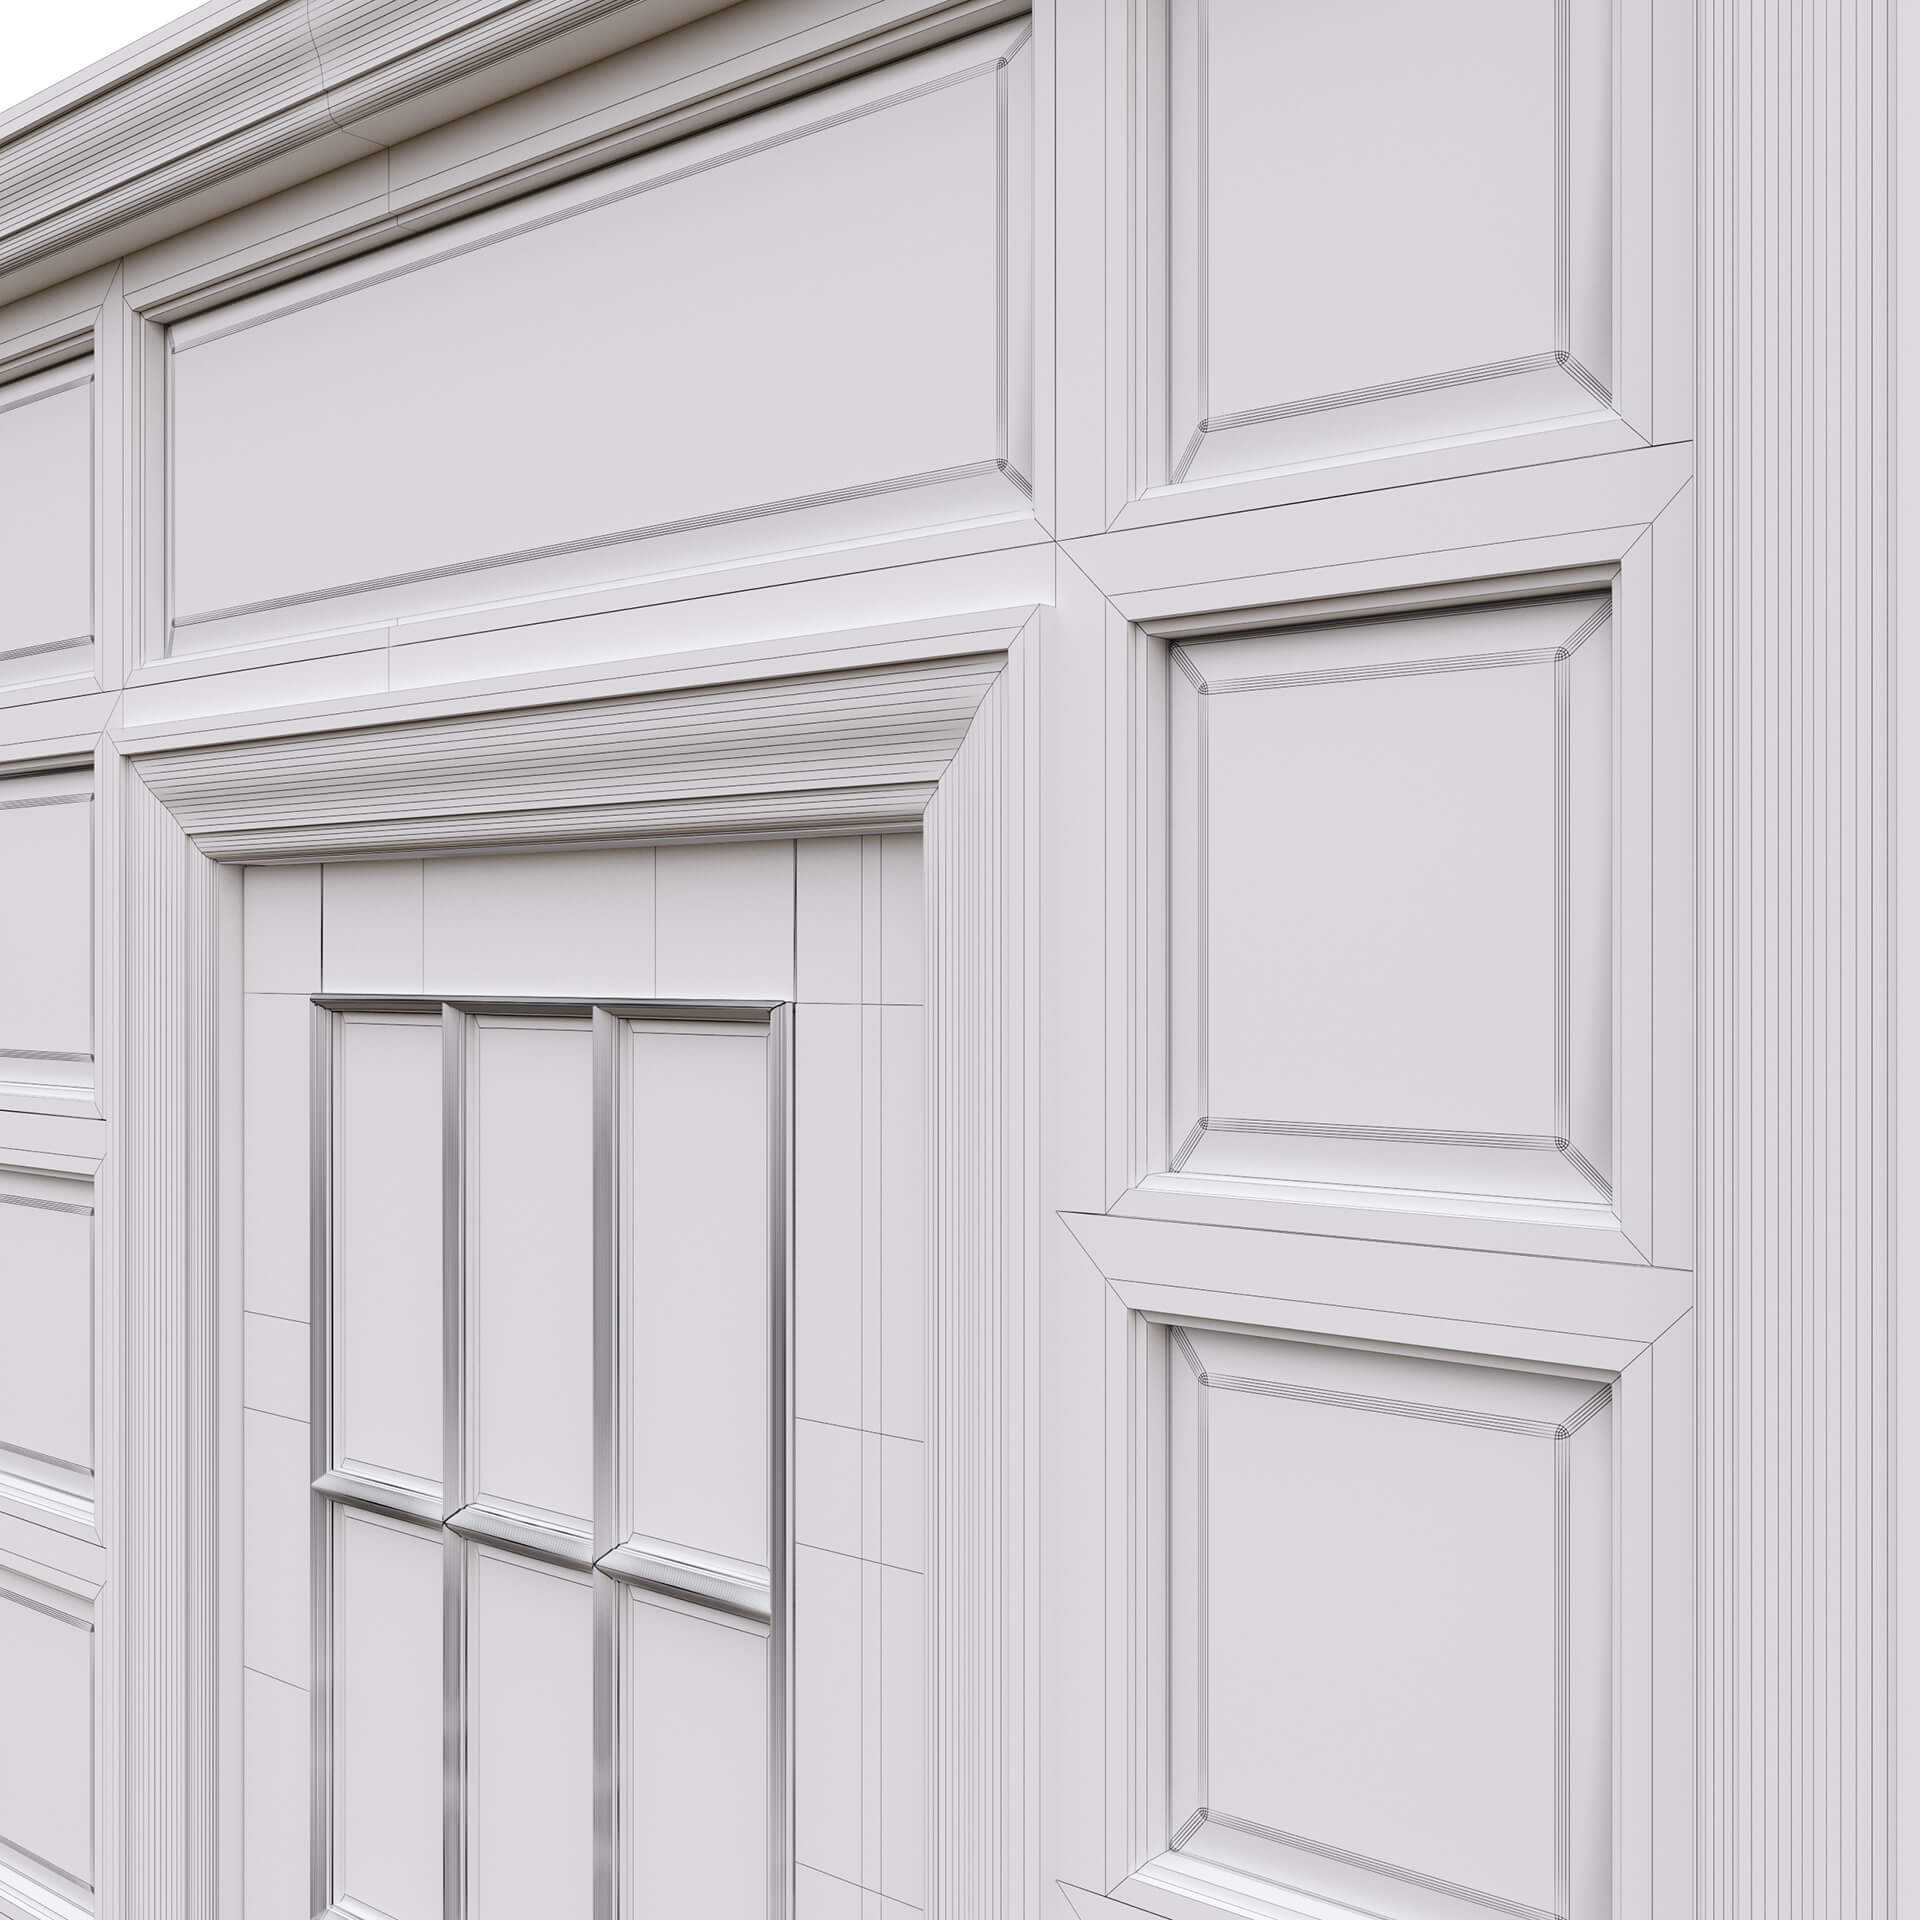 Accurate and Detailed 3D Model of a Door